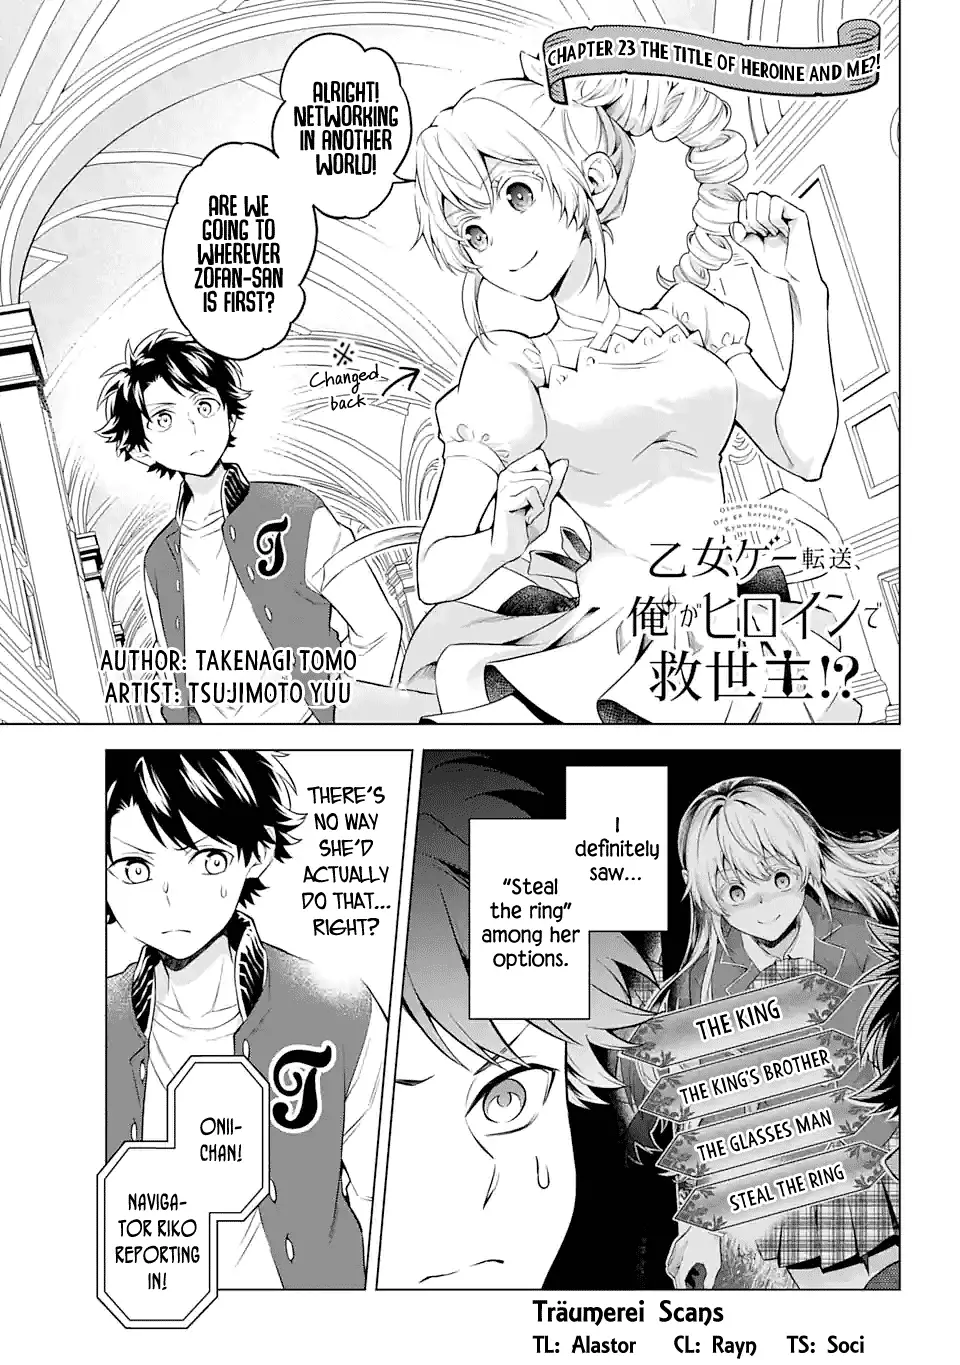 Transferred To Another World, But I'm Saving The World Of An Otome Game!? - 23 page 1-23f2509c